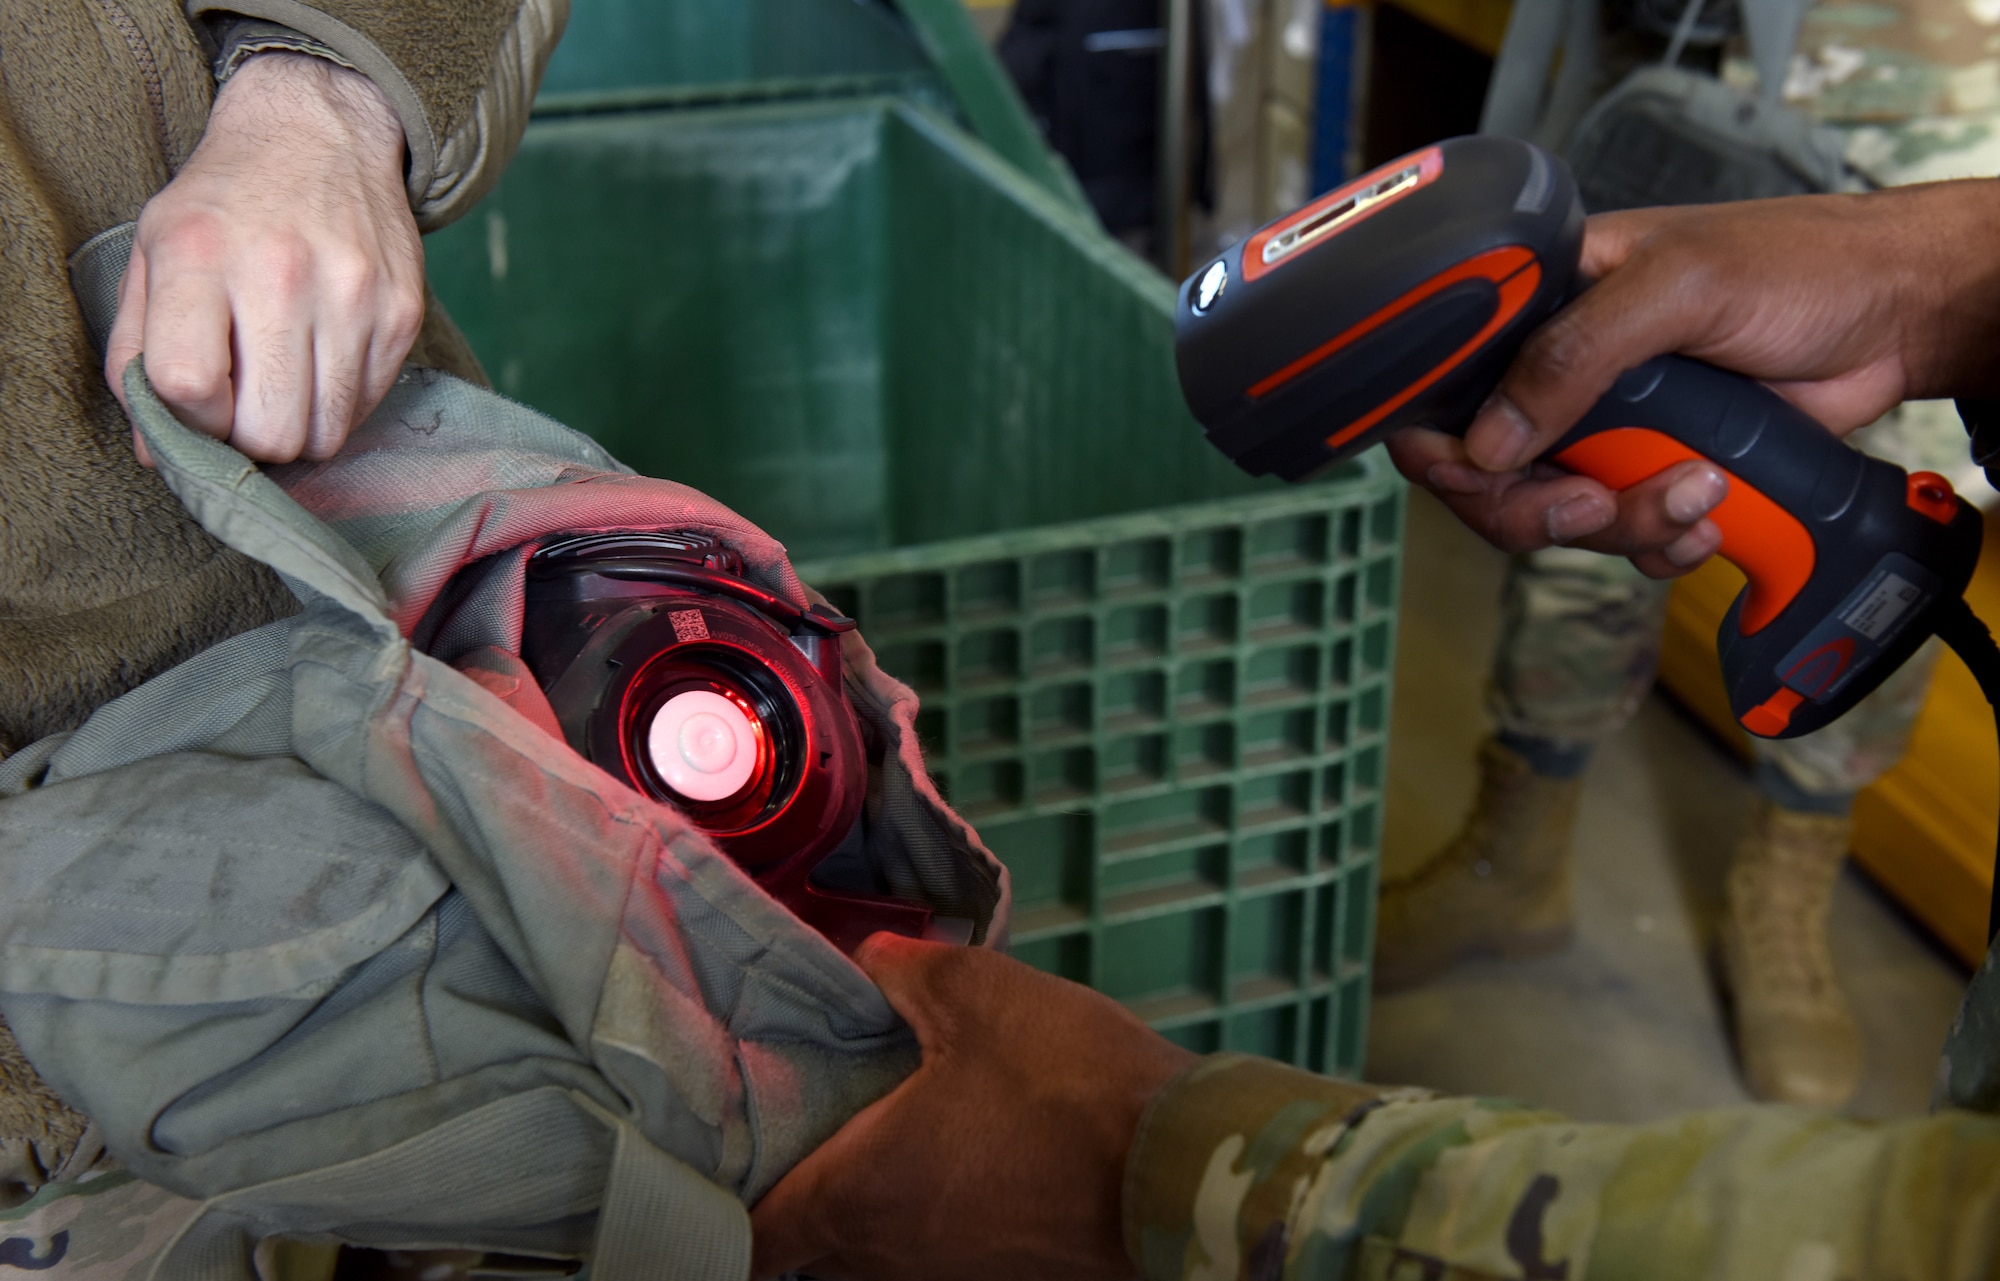 U.S. Air Force Airman 1st Class Demetrius Bates, right, 100th Logistics Readiness Squadron Individual Protective Equipment apprentice, scans in old, used gas masks before they are packed and returned to depot in the States at Royal Air Force Mildenhall, England, March 15, 2022. Airmen in the IPE shop support geographically separated units including RAF Croughton, and Stavanger, Norway, and issue all gear for chemical warfare assets to members tasked for deployments and TDYs, ensuring they are issued the correct equipment. (U.S. Air Force photo by Karen Abeyasekere)